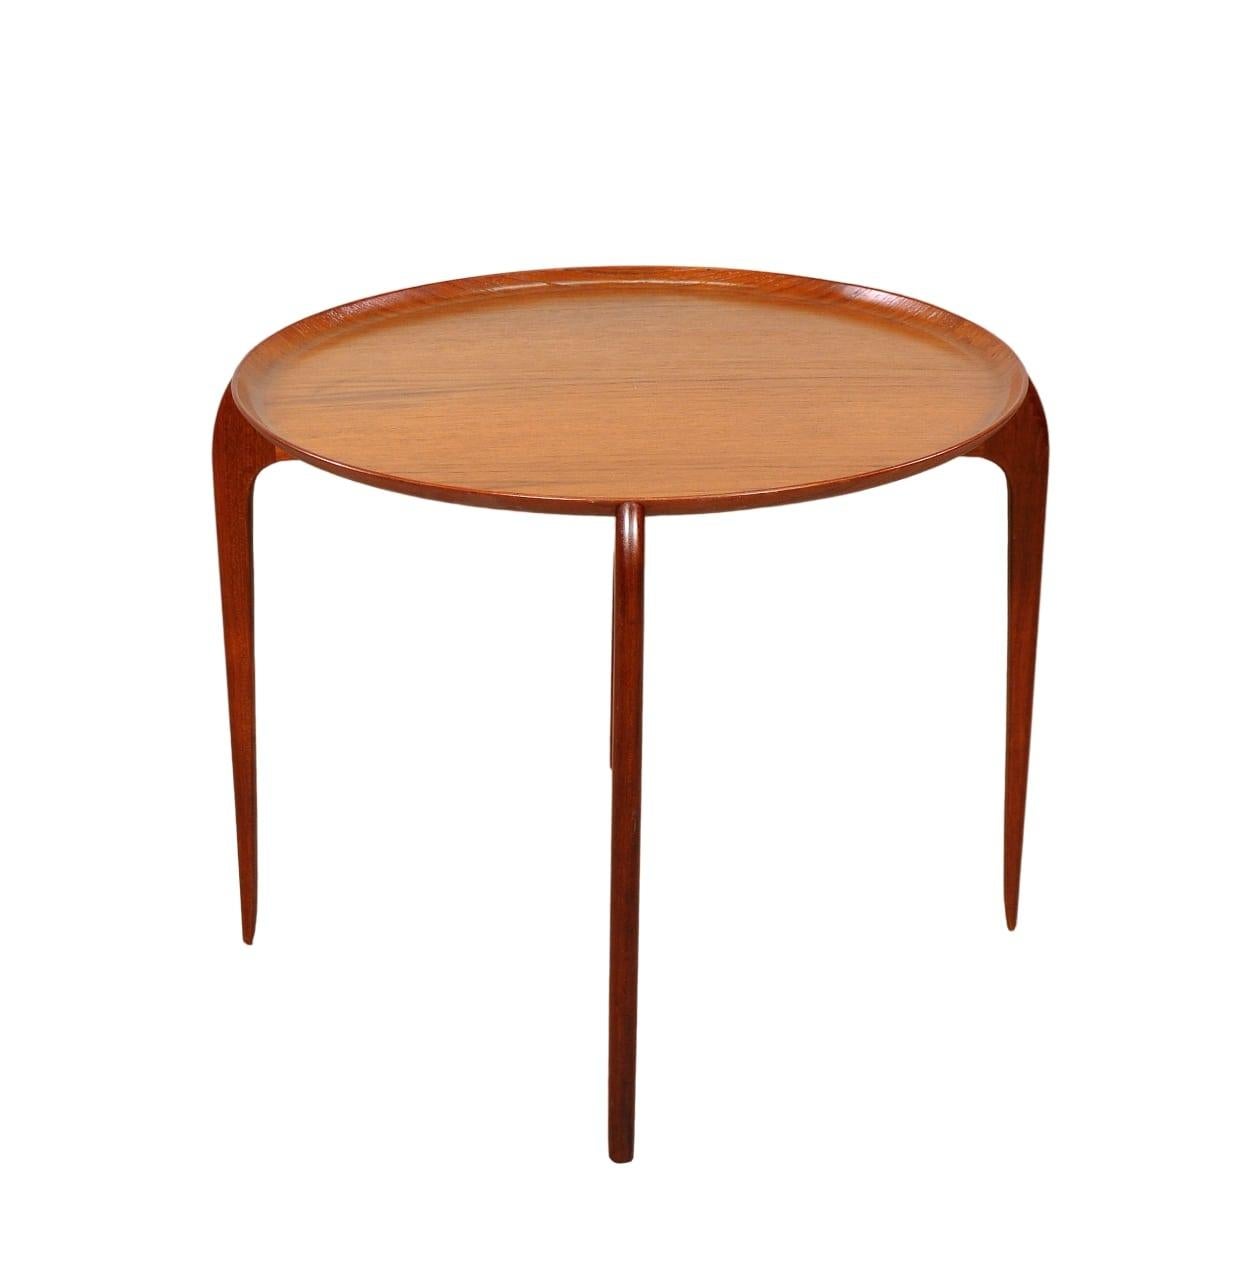 Scandinavian Modern Danish Teak Tray Table by Engholm and Willumsen for Fritz Hansen, 1960s For Sale